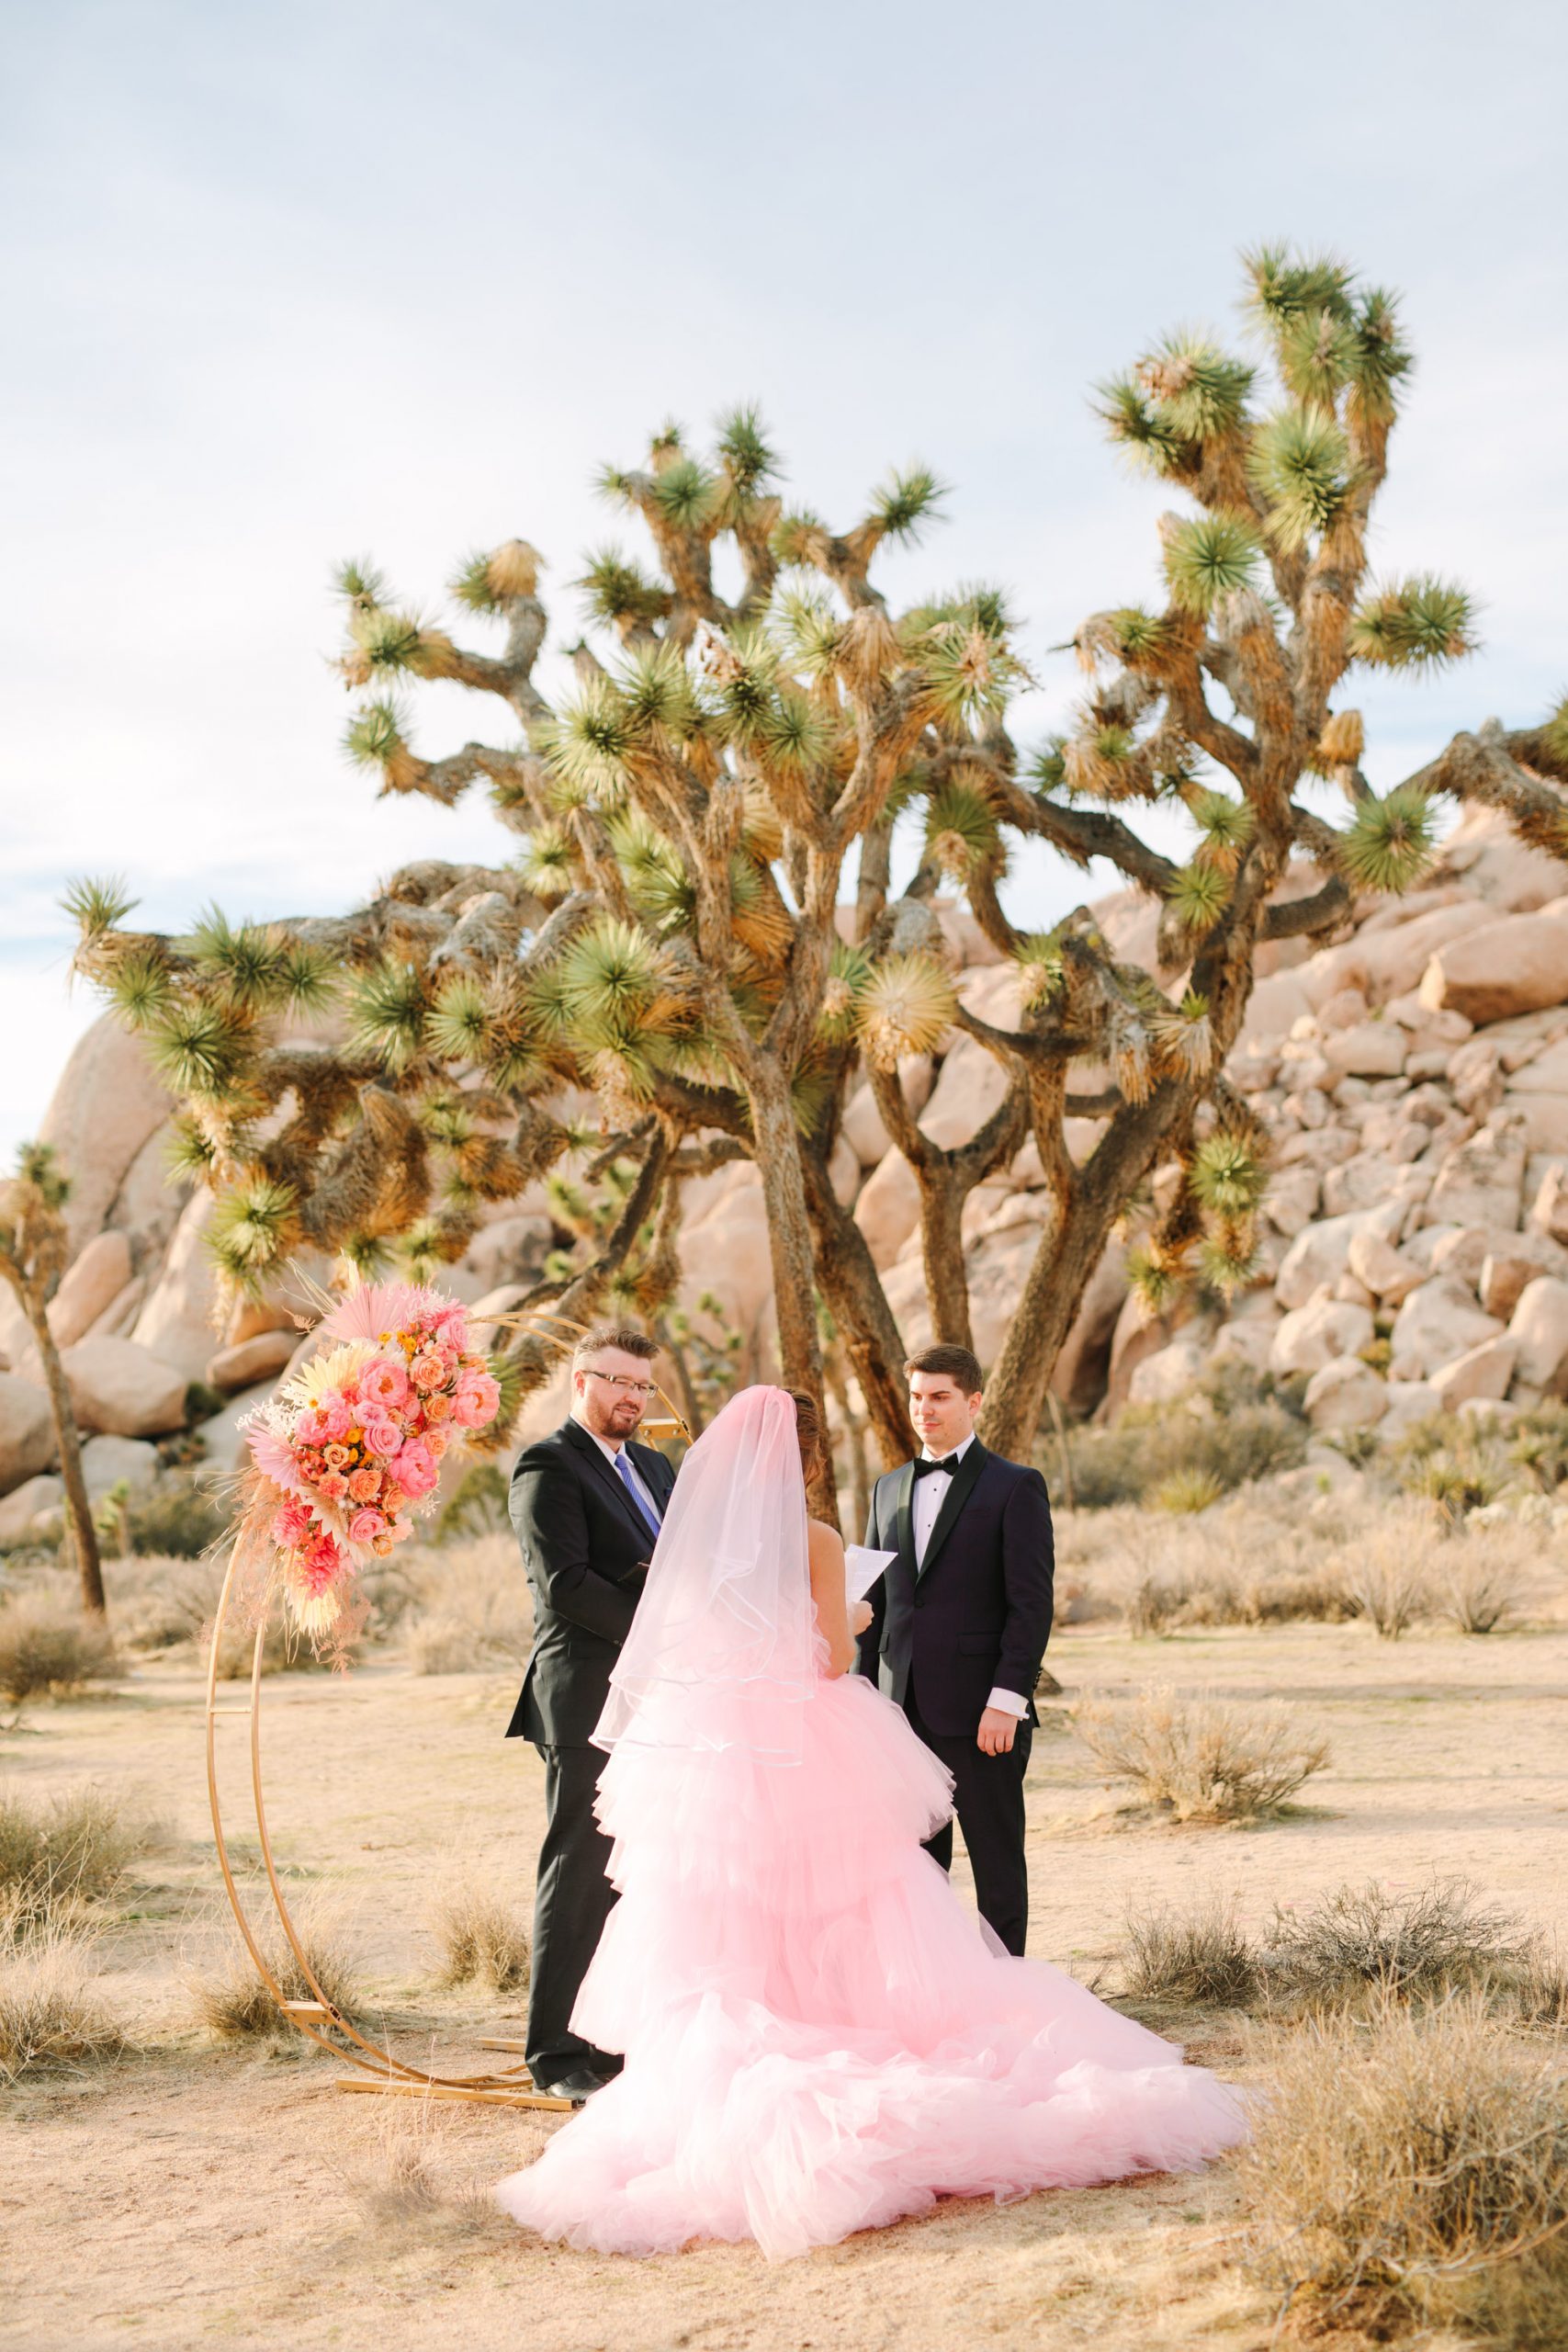 Pink elopement ceremony | Pink wedding dress Joshua Tree elopement featured on Green Wedding Shoes | Colorful desert wedding inspiration for fun-loving couples in Southern California #joshuatreewedding #joshuatreeelopement #pinkwedding #greenweddingshoes Source: Mary Costa Photography | Los Angeles